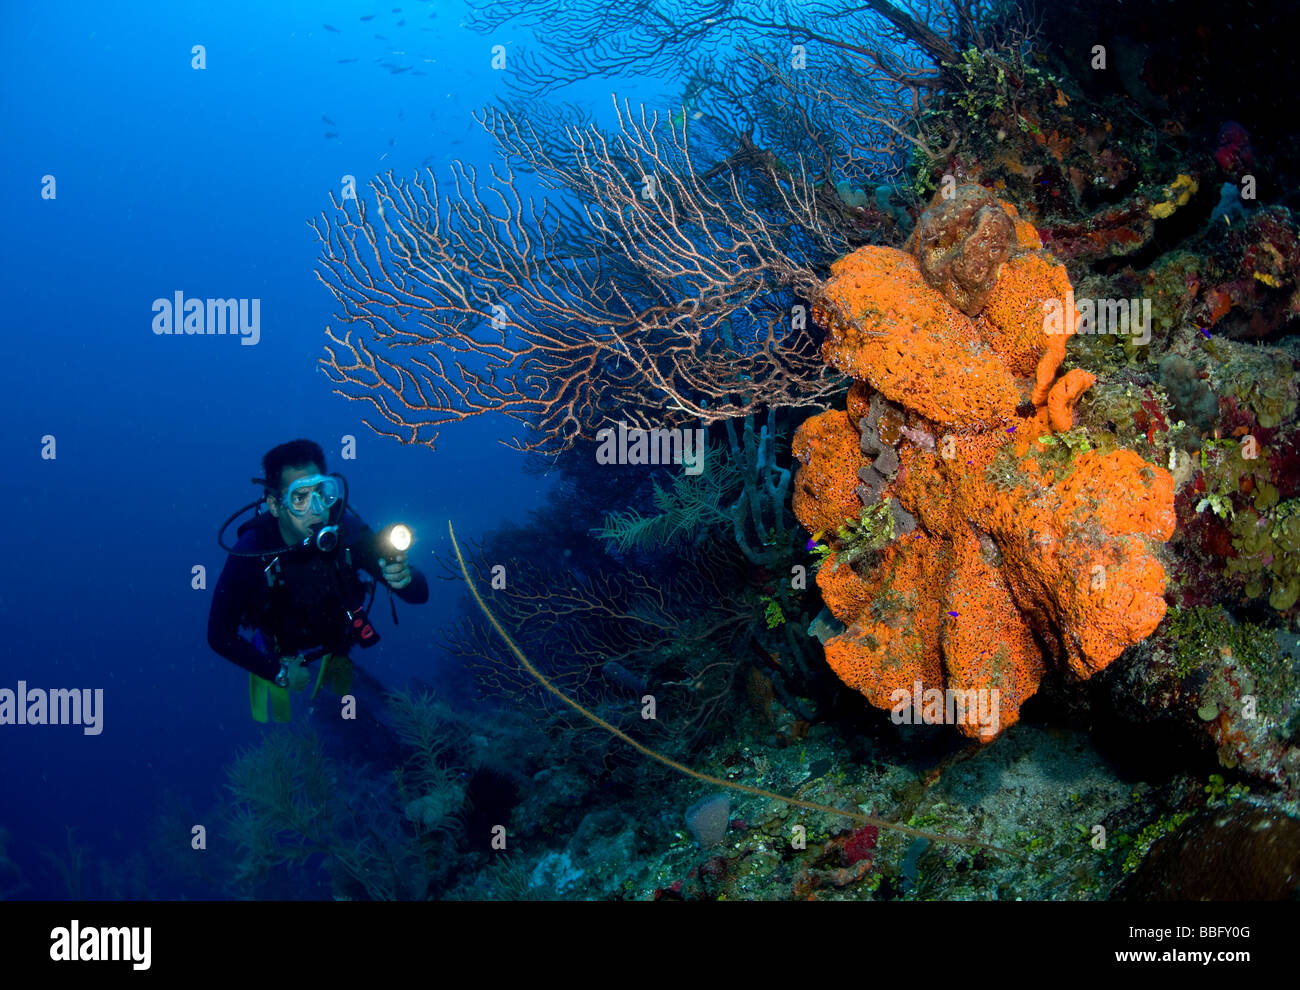 Coral reef scene with diver. Stock Photo